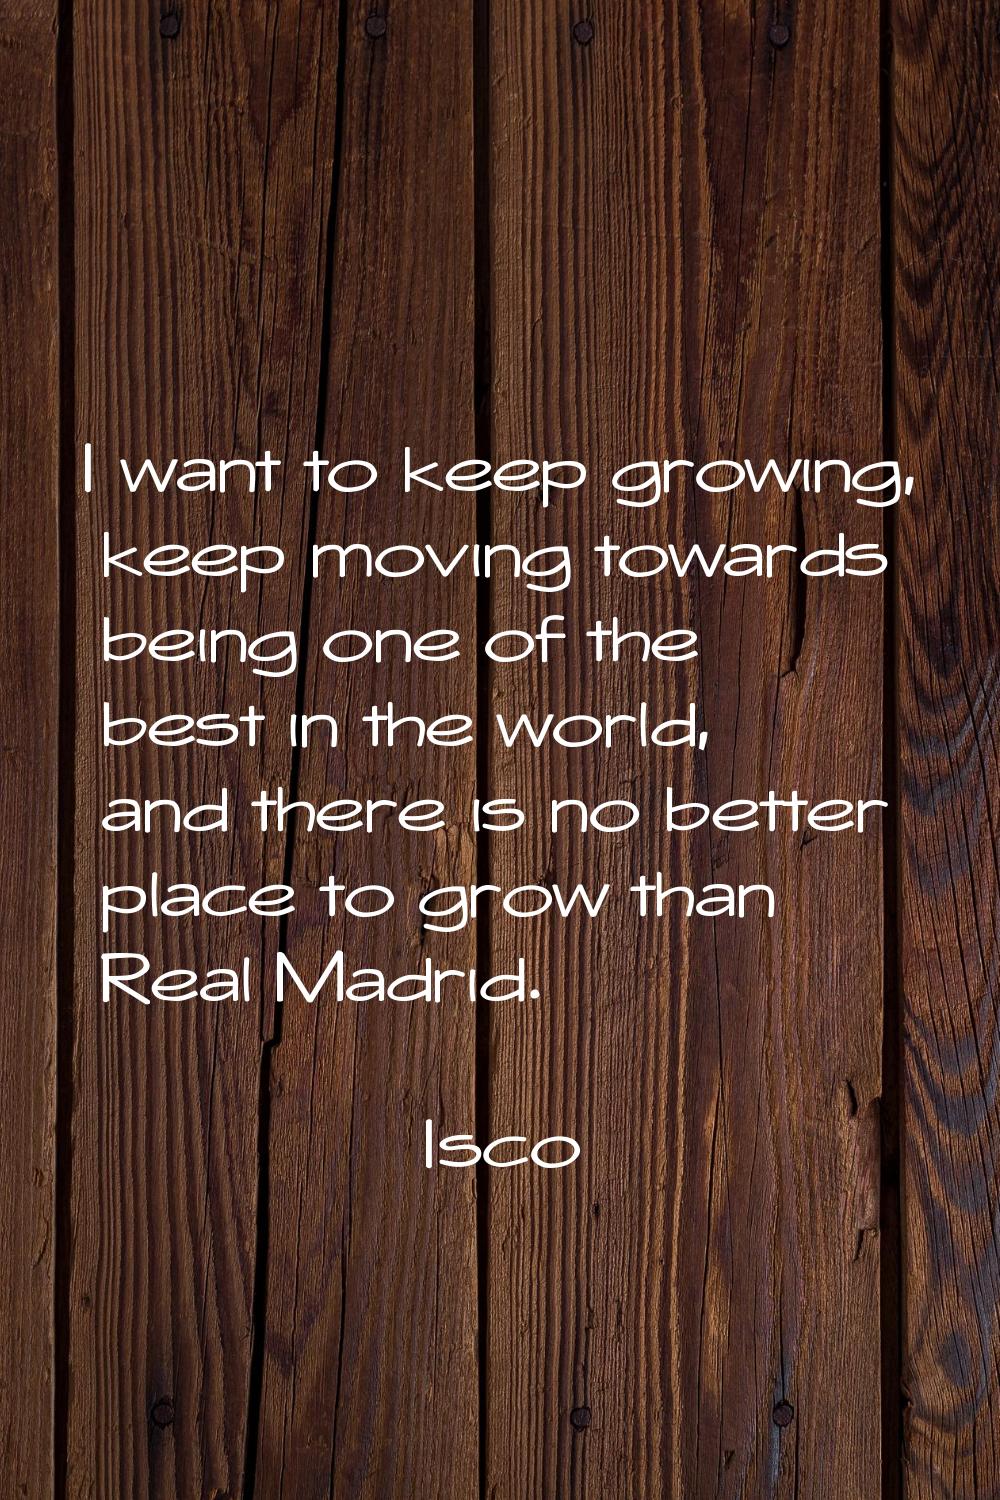 I want to keep growing, keep moving towards being one of the best in the world, and there is no bet